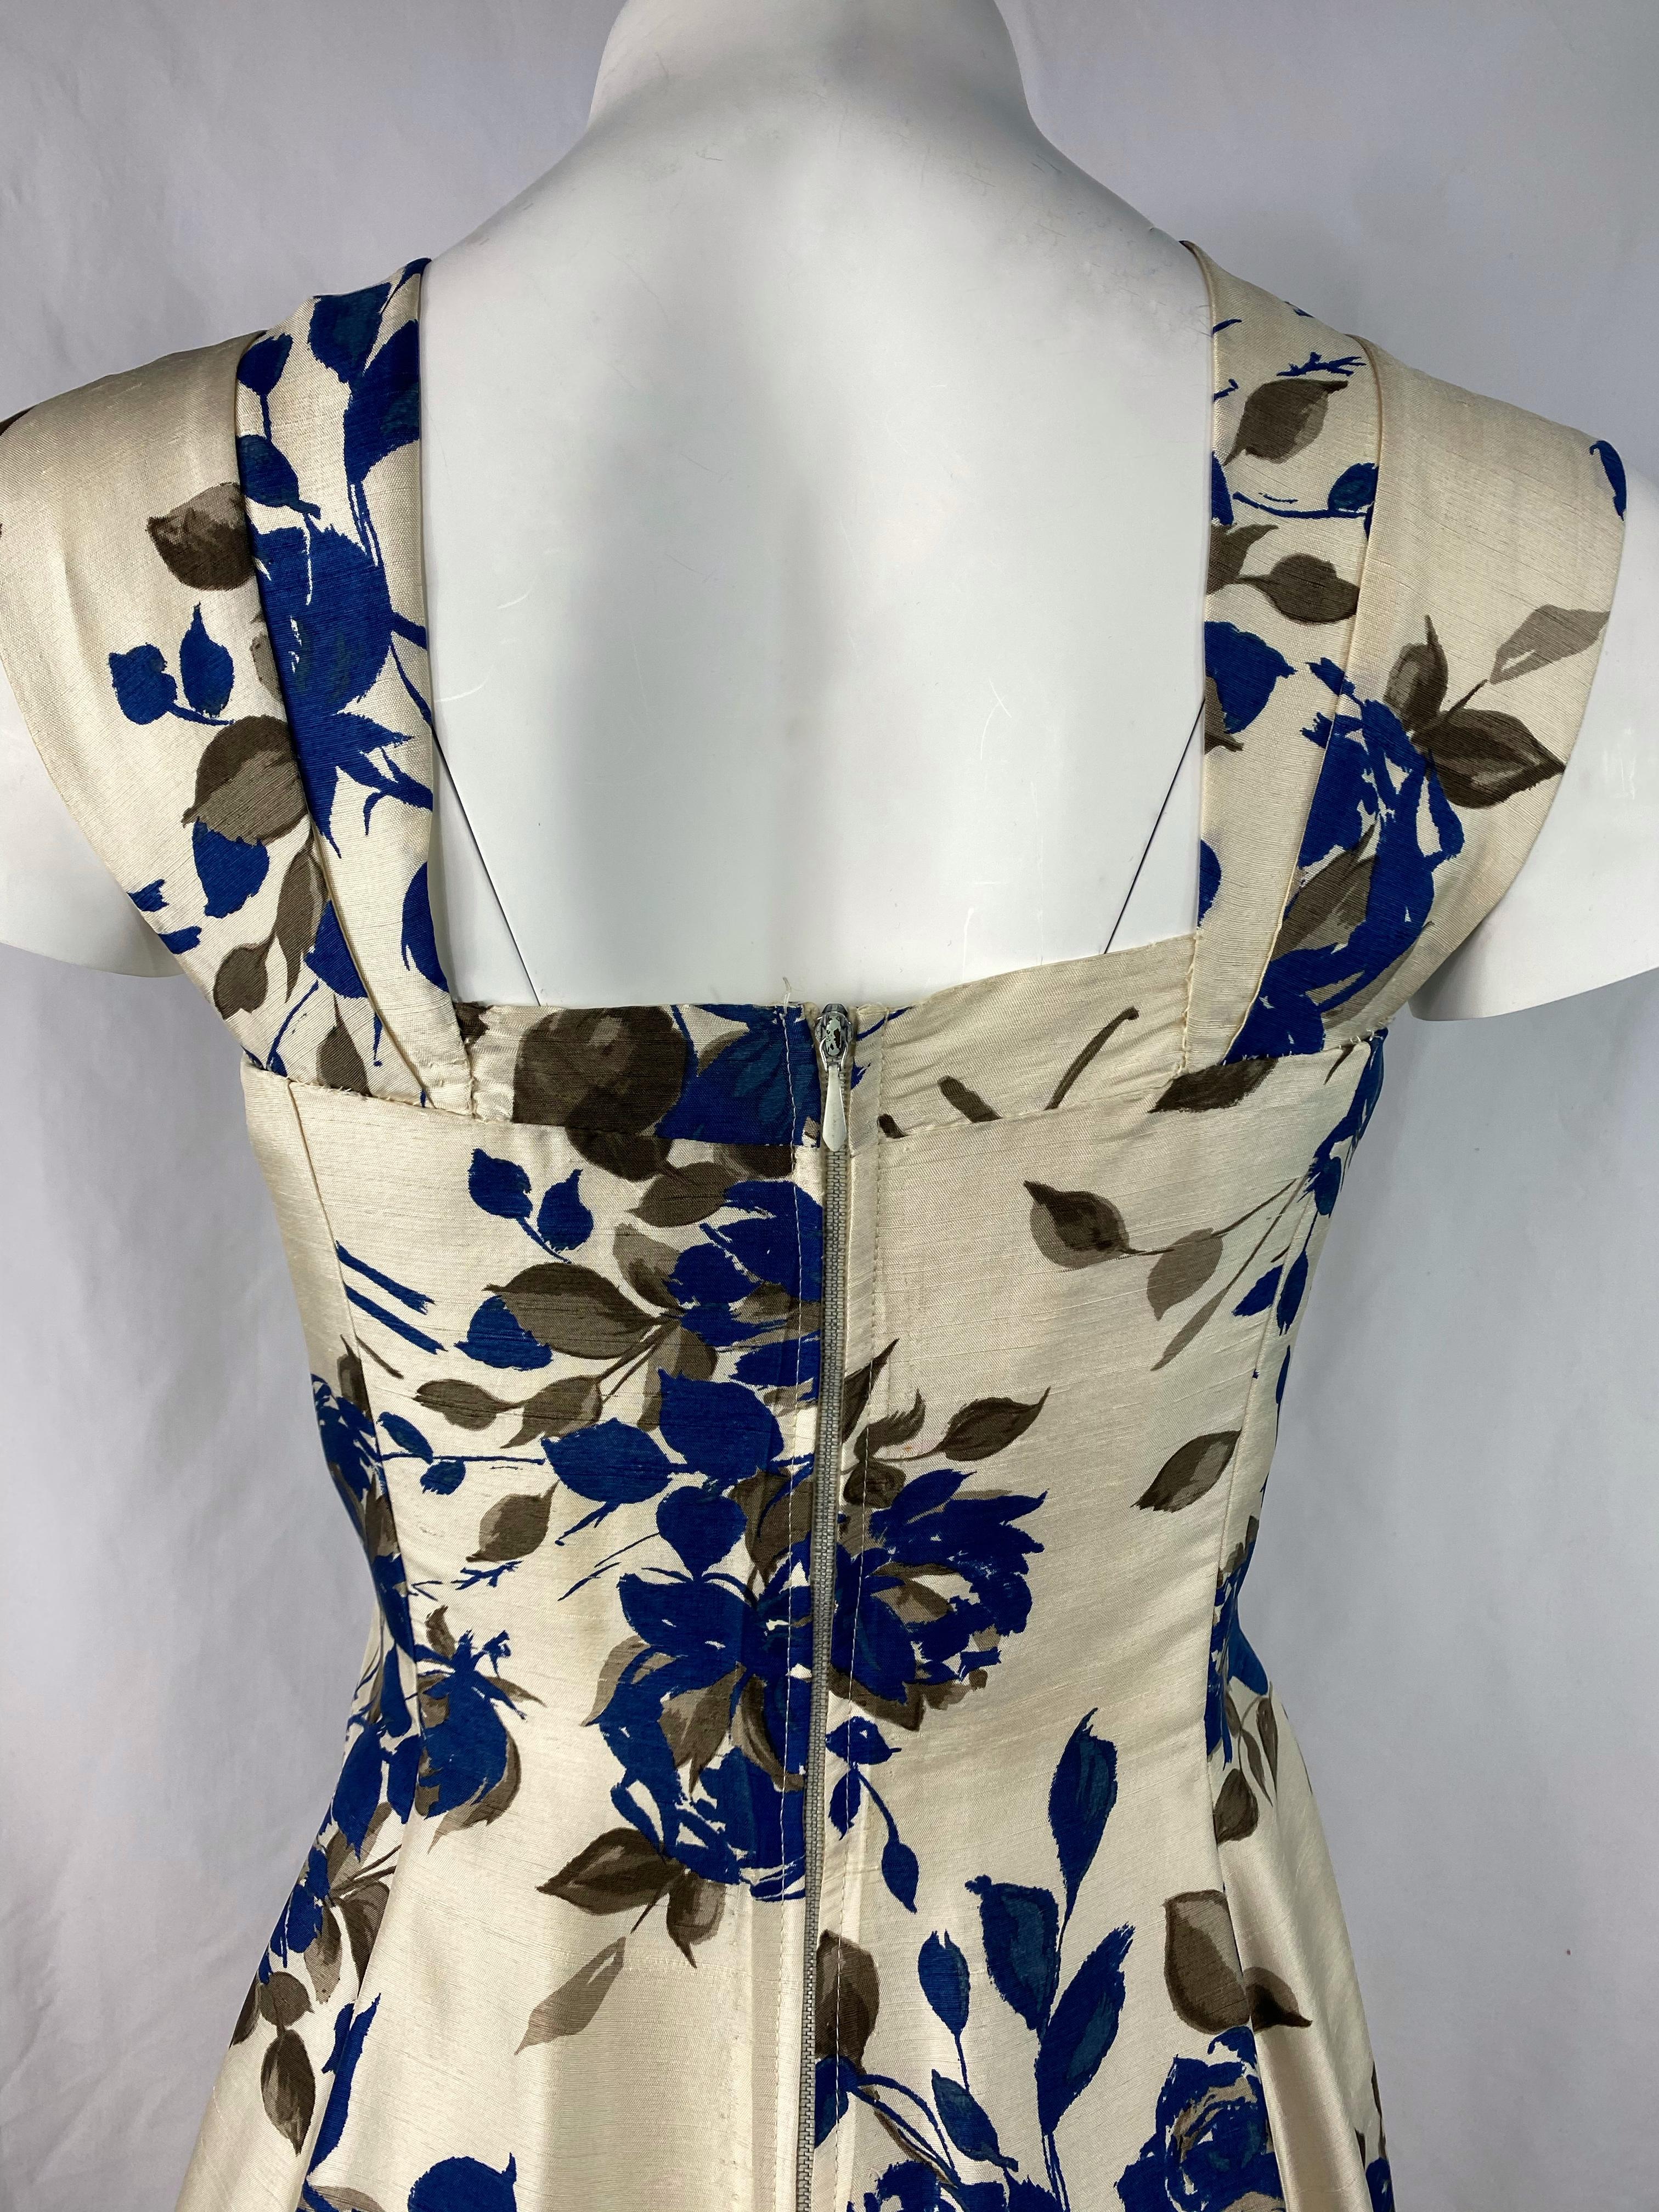 Marwi Cream and Navy Floral Sleeveless Dress, Size 40 In Excellent Condition For Sale In Beverly Hills, CA